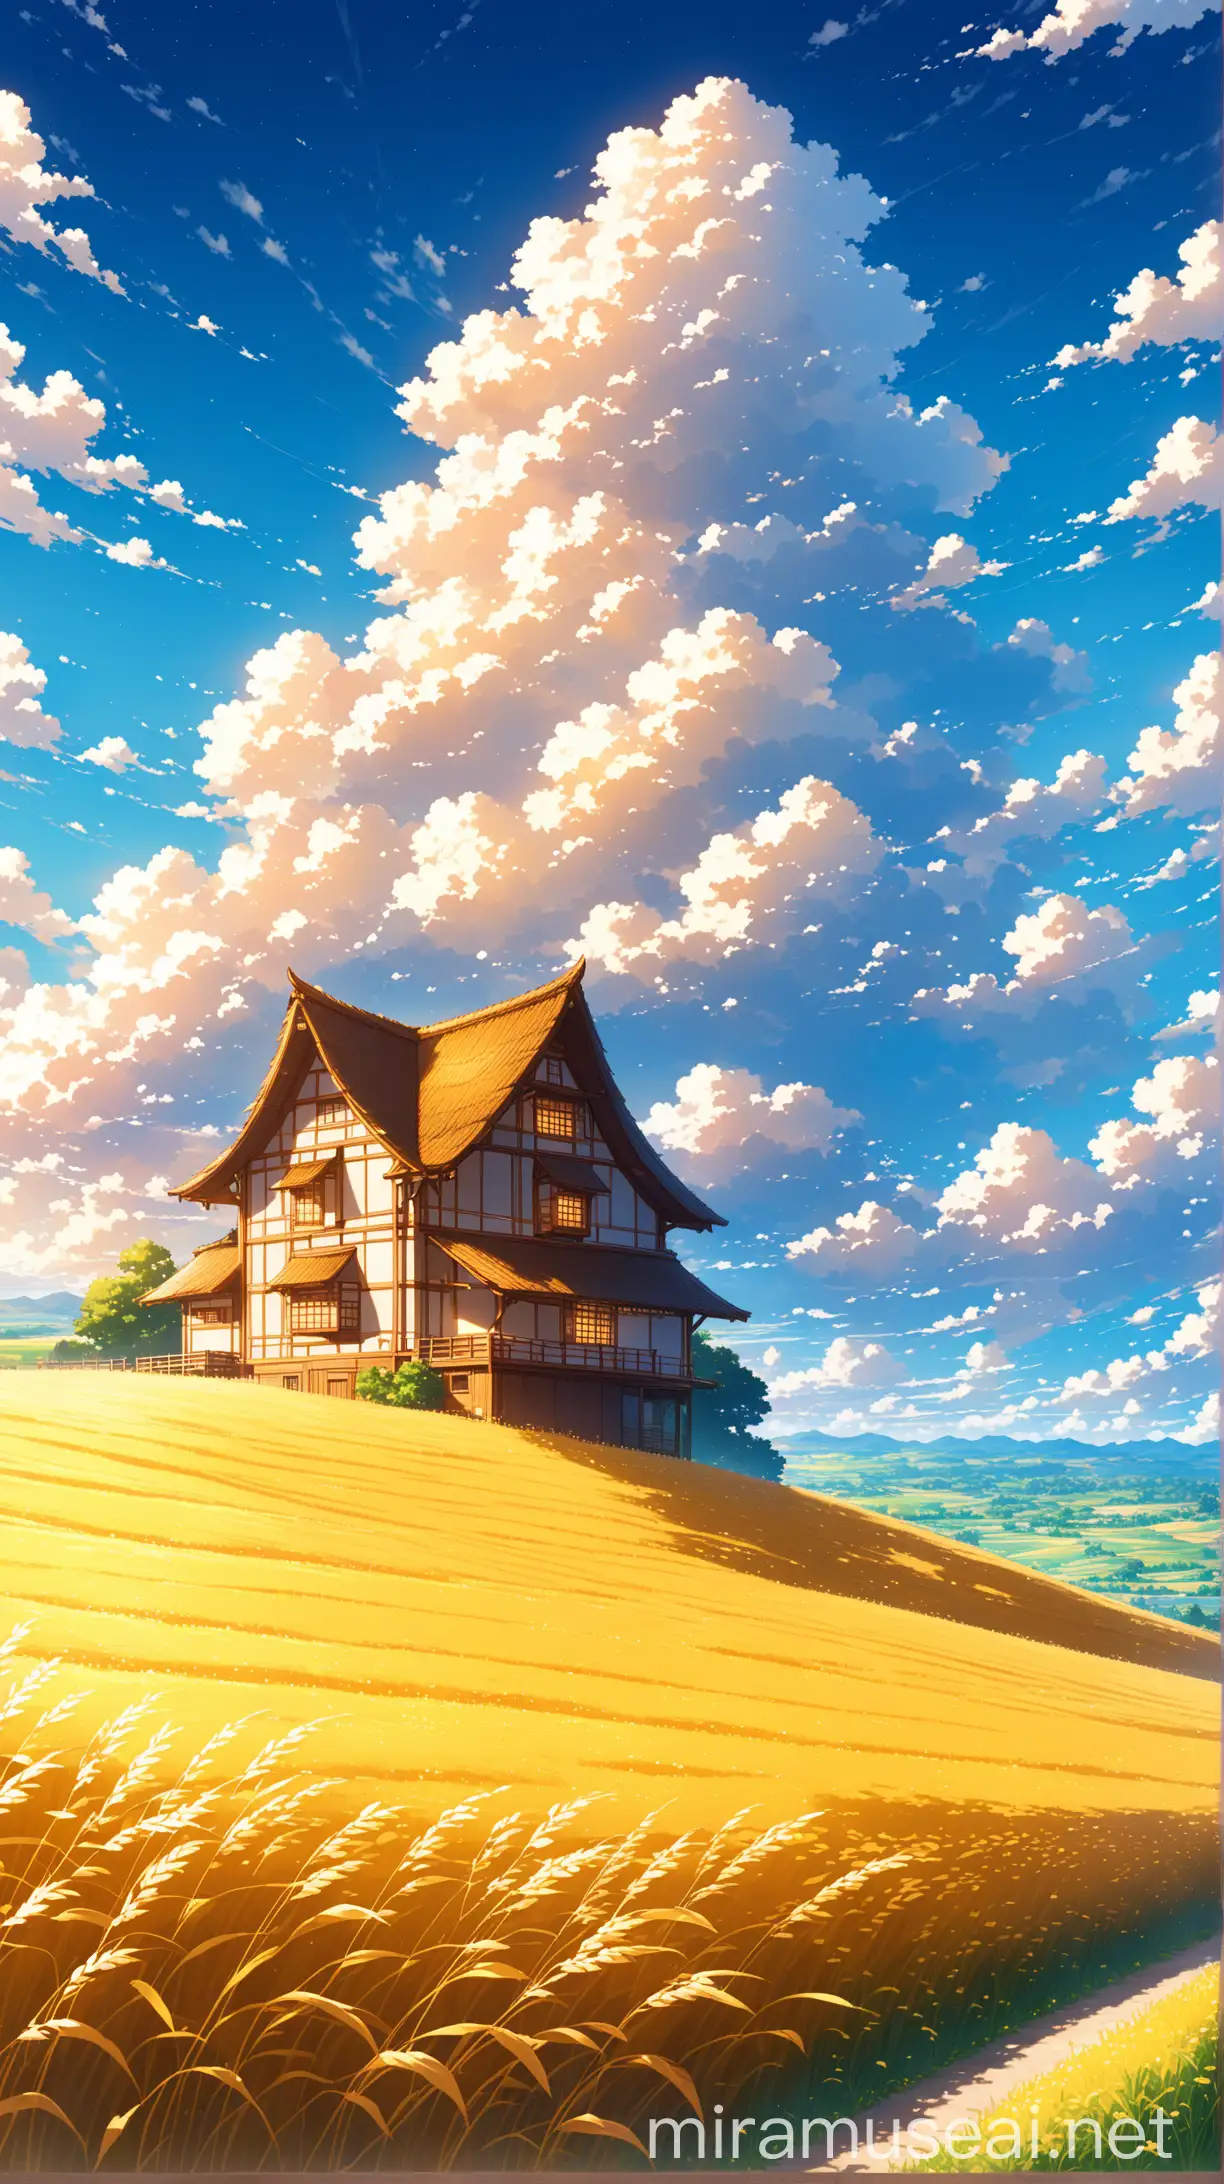 Quaint Cottage Surrounded by Golden Fields under an Anime Sky